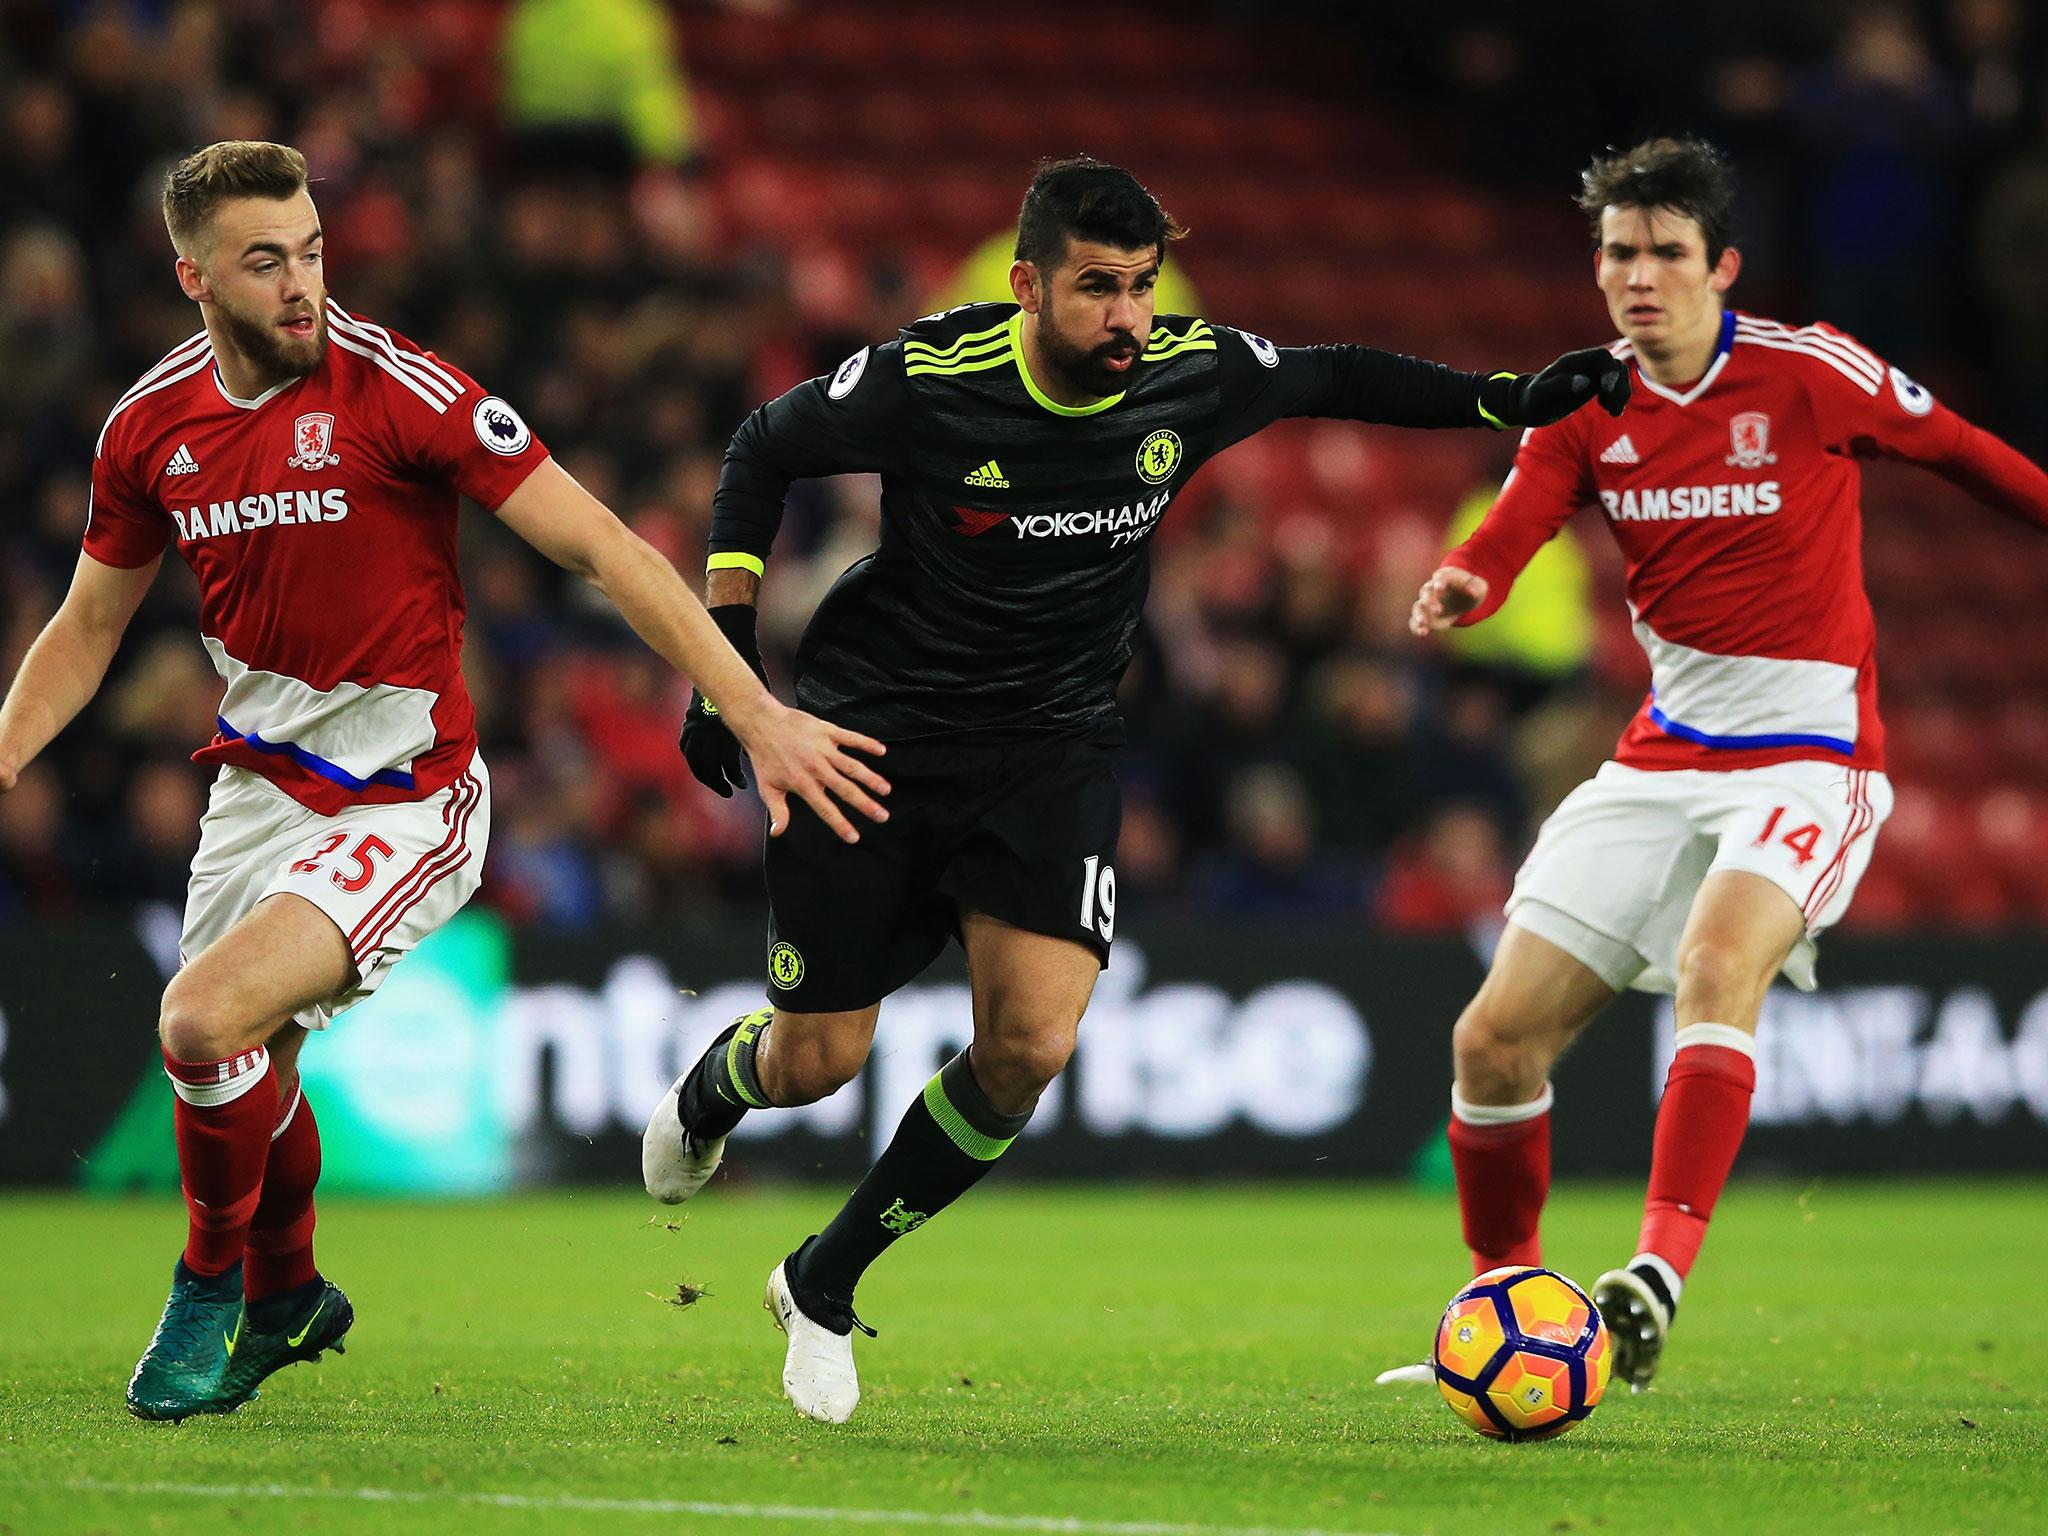 Costa is the first player to reach double figures this season